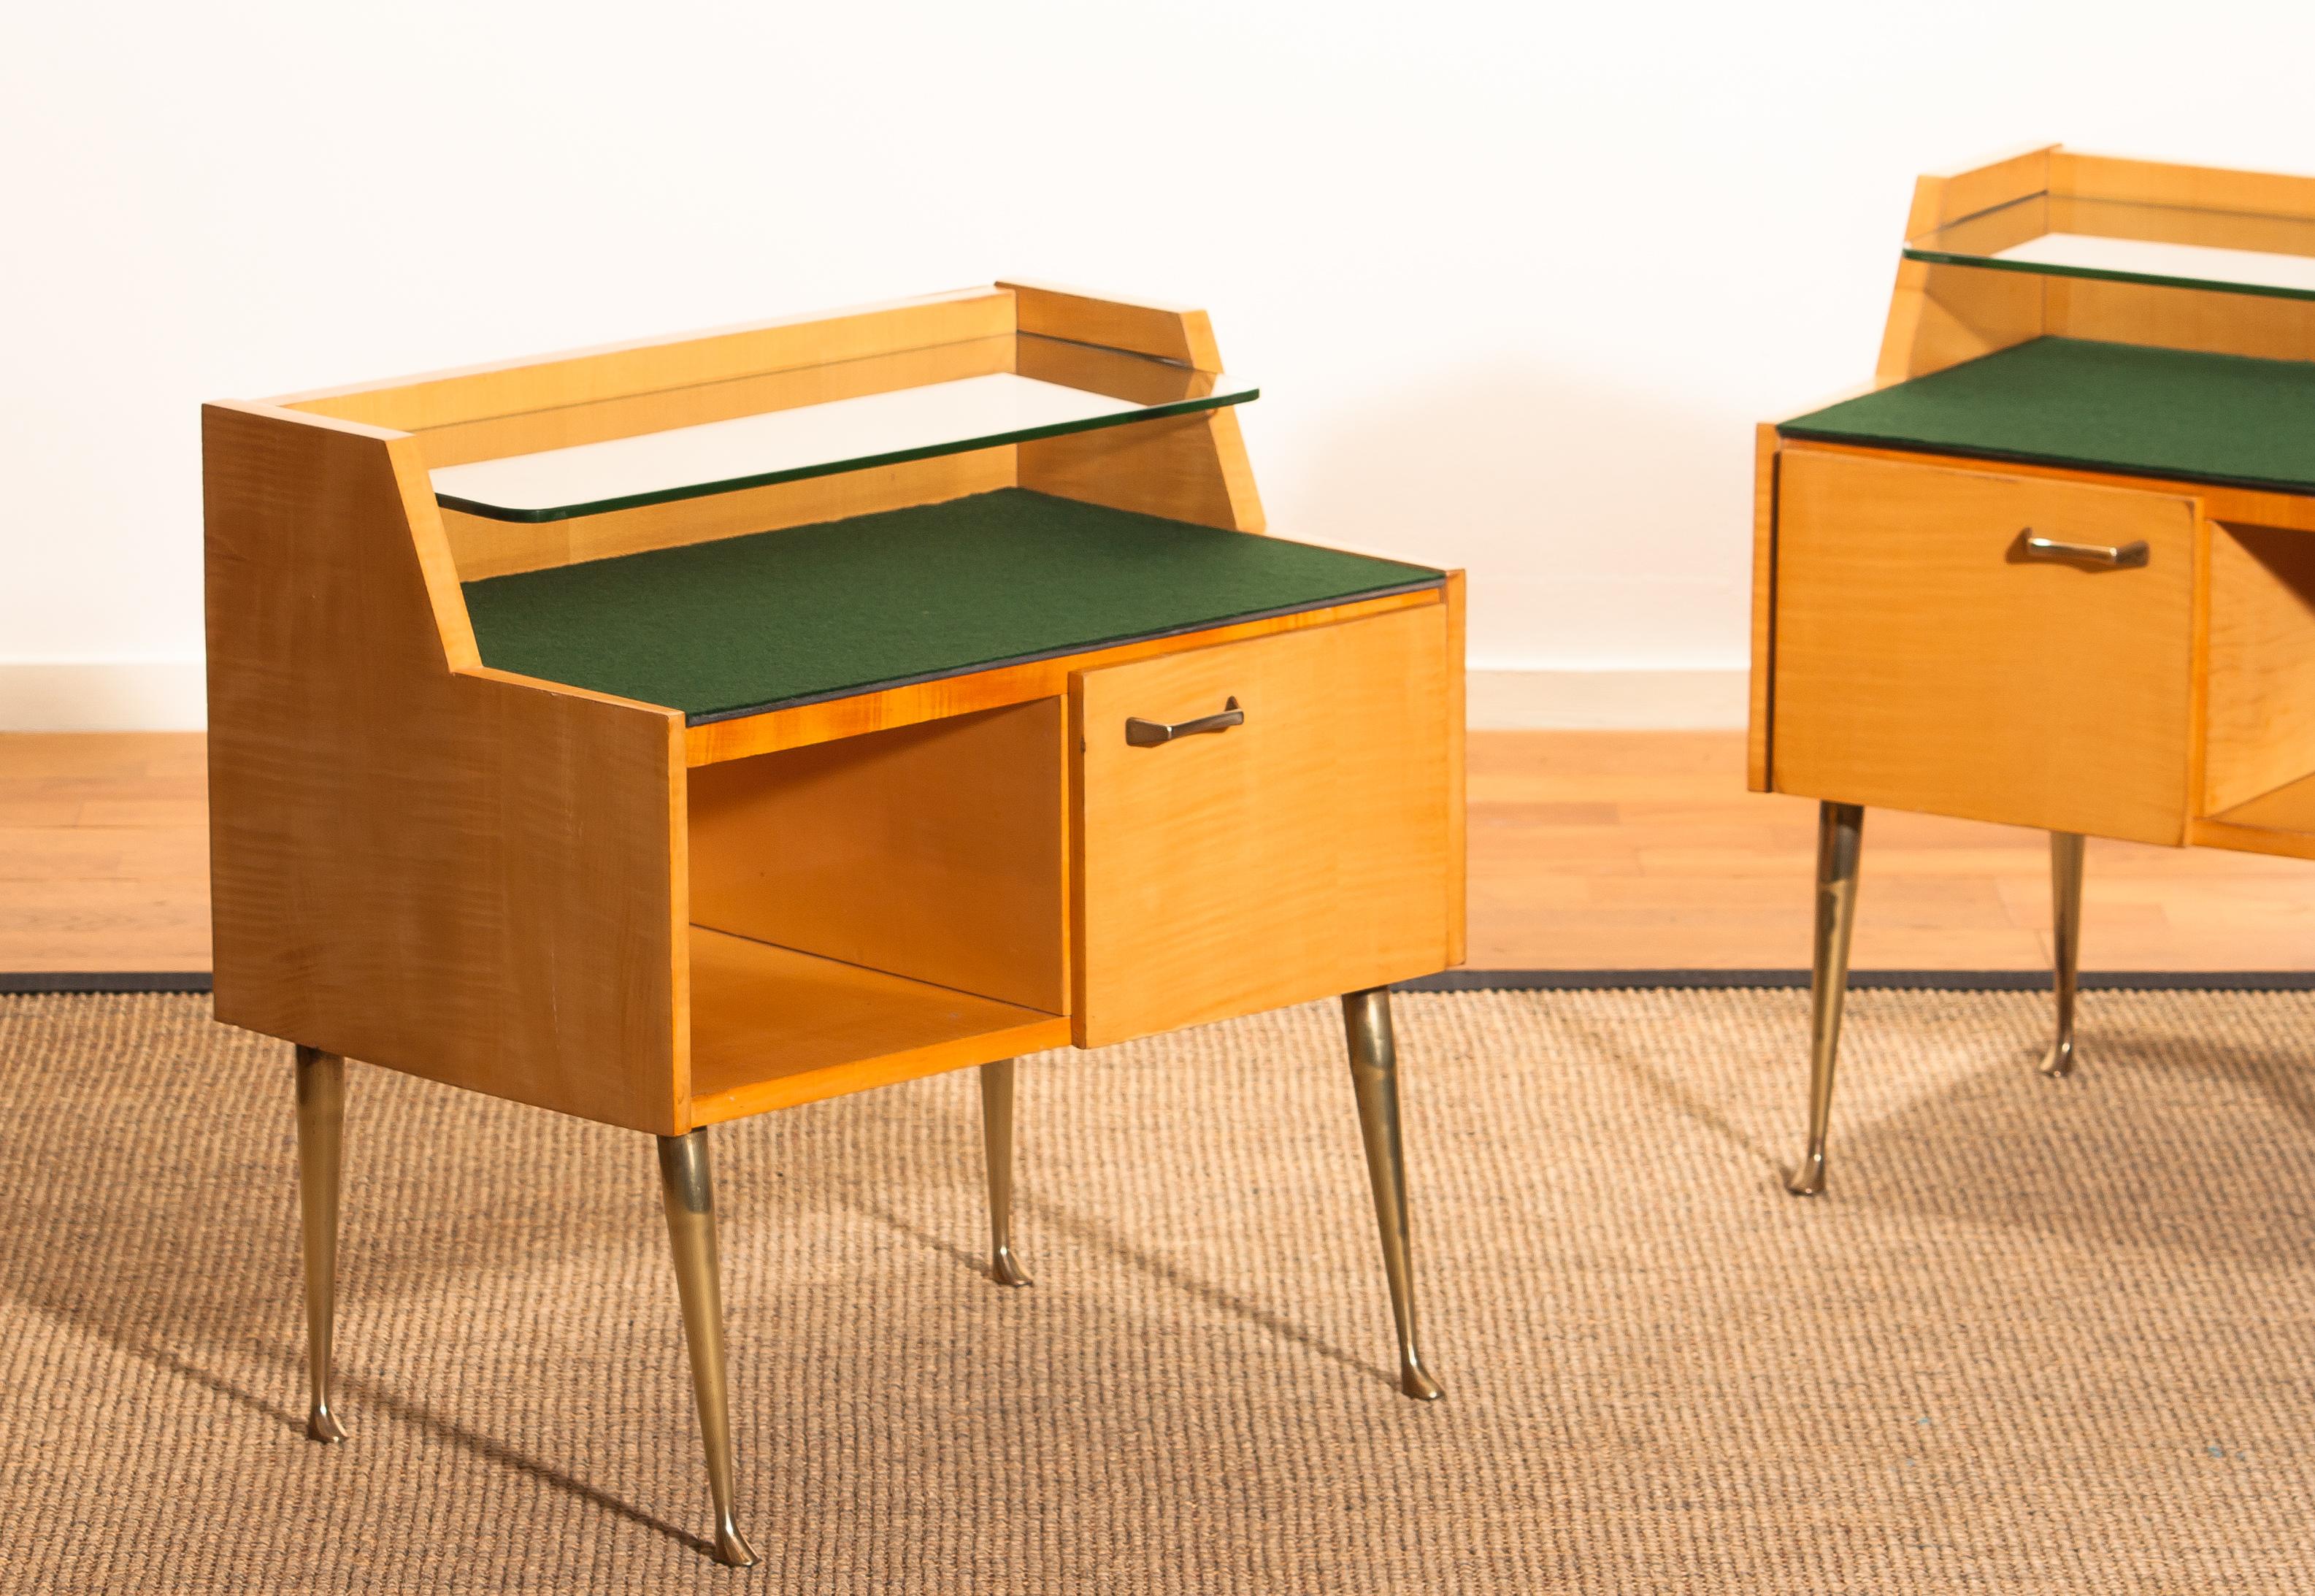 1950s, Pair of Italian Nightstands in Maple with Brass Legs by Paolo Buffa 5